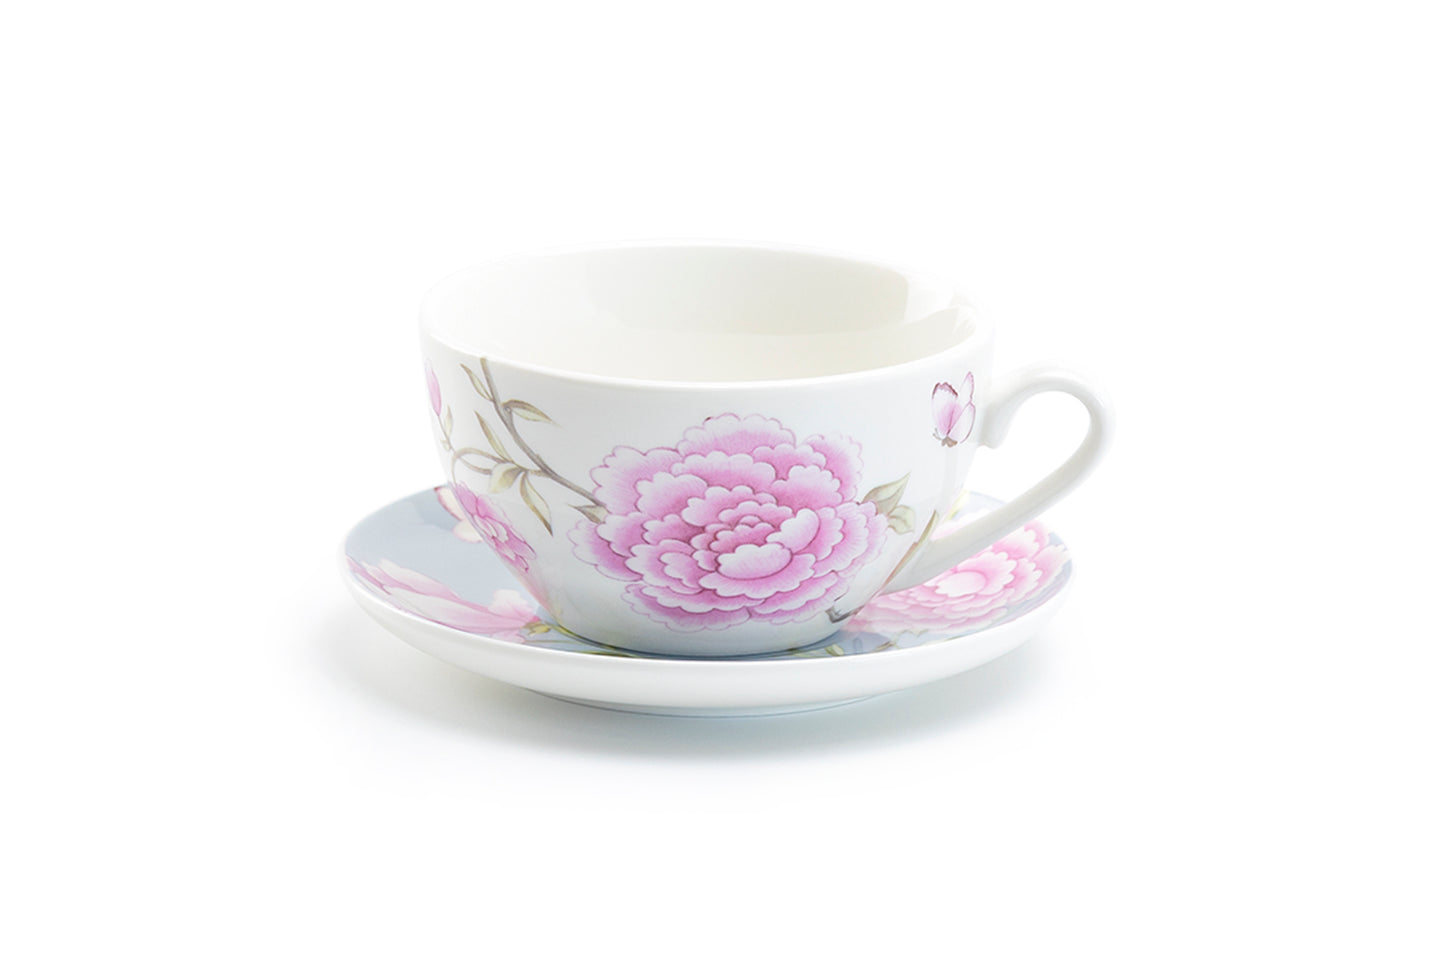 Stechcol Gracie China Peony and Magnolia Fine Porcelain Cup and Saucer